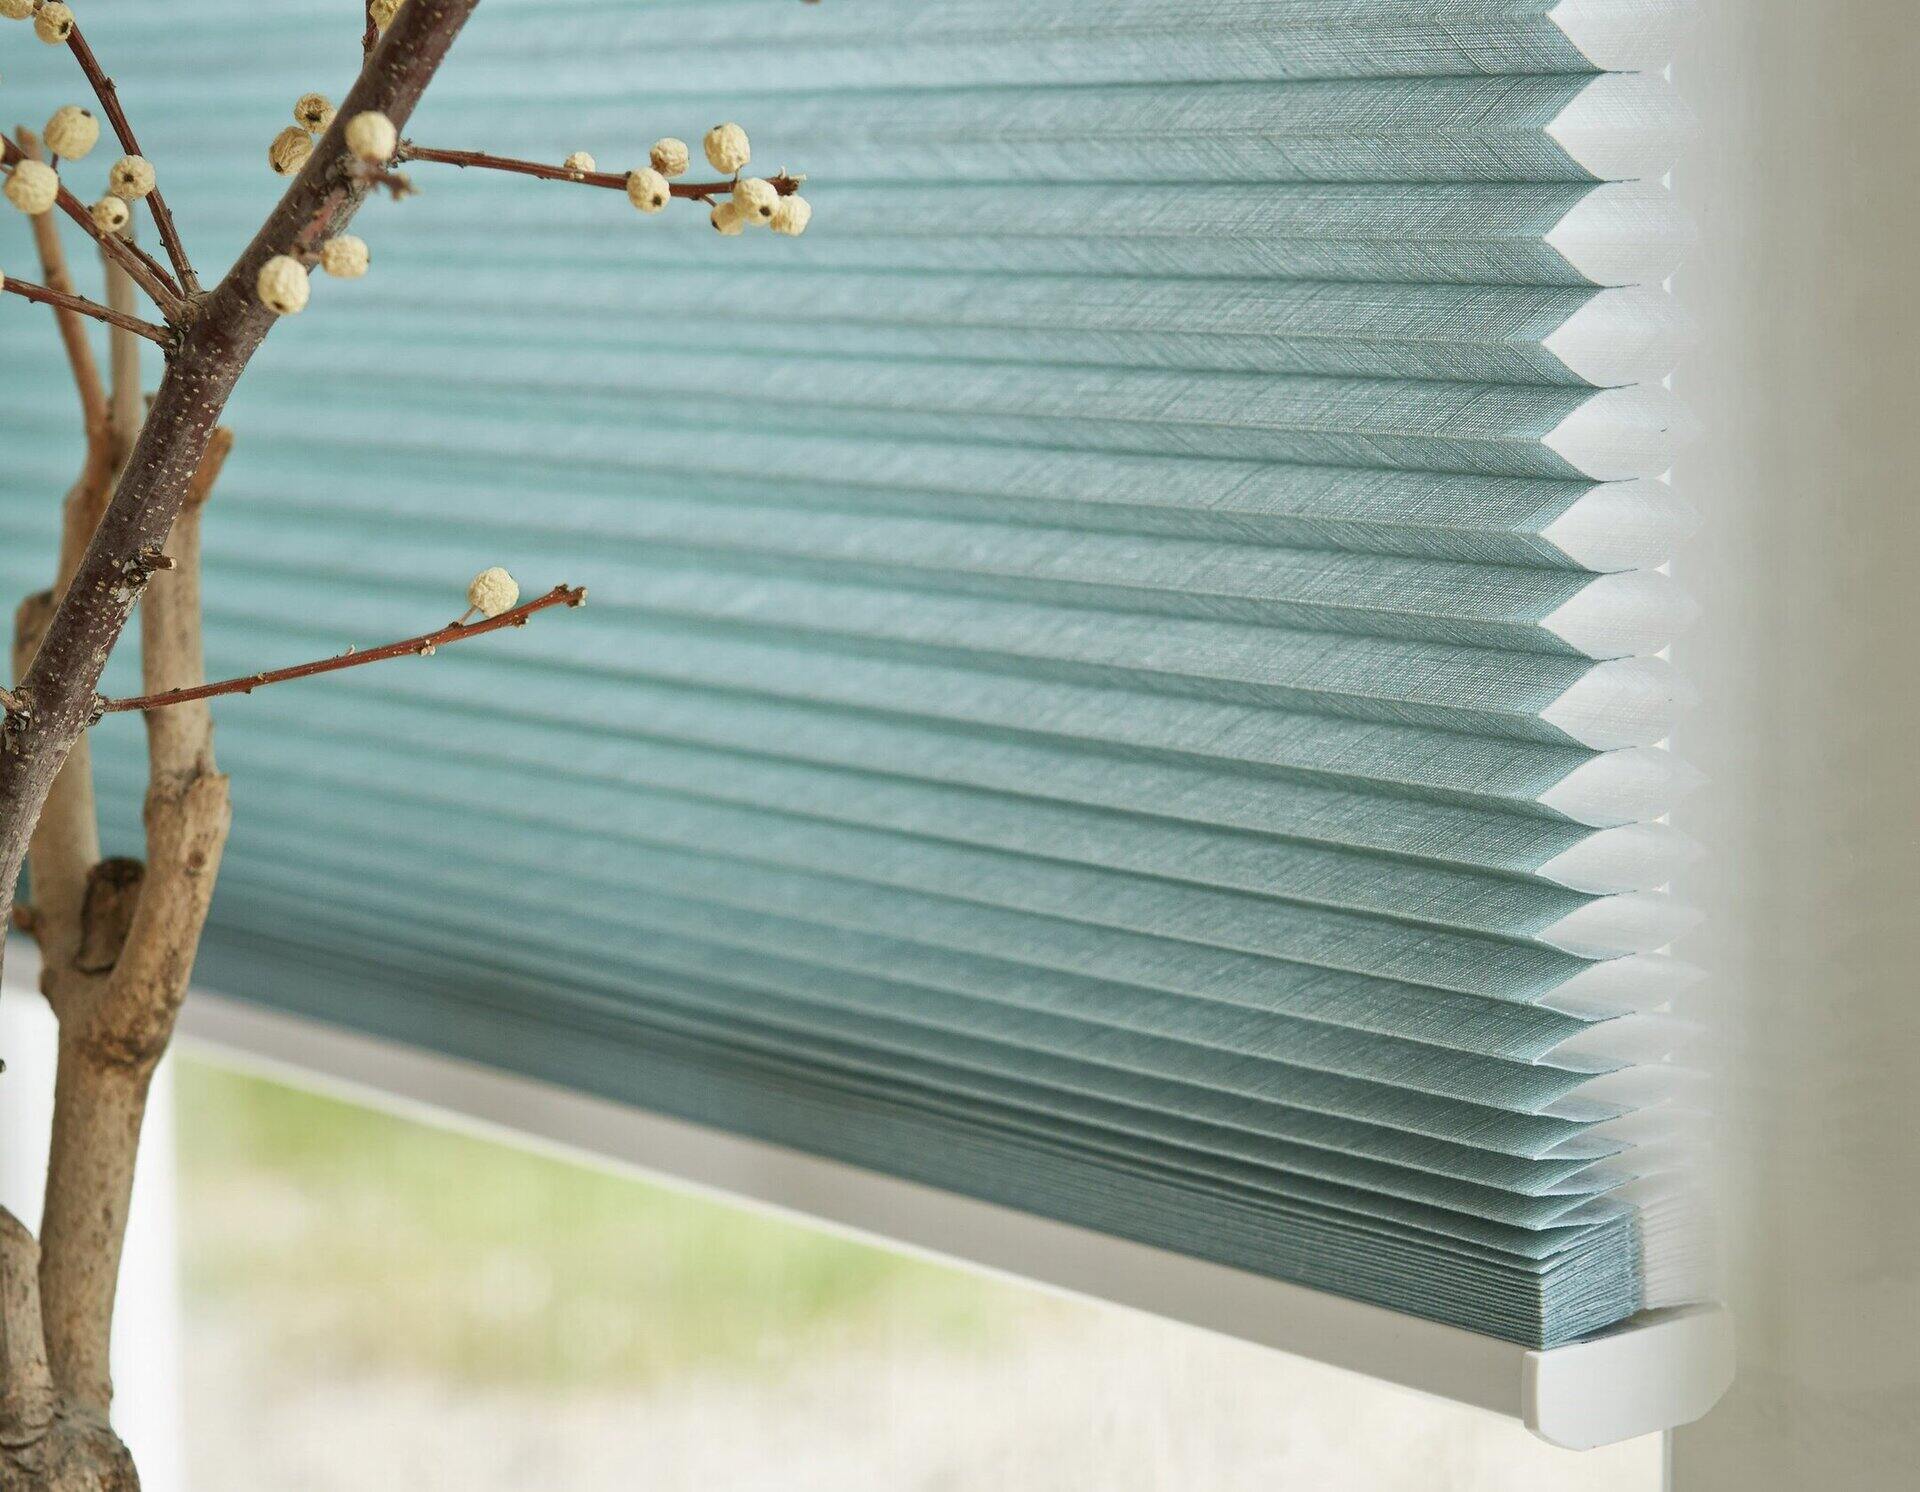 How To Clean Fabric Accordion Blinds